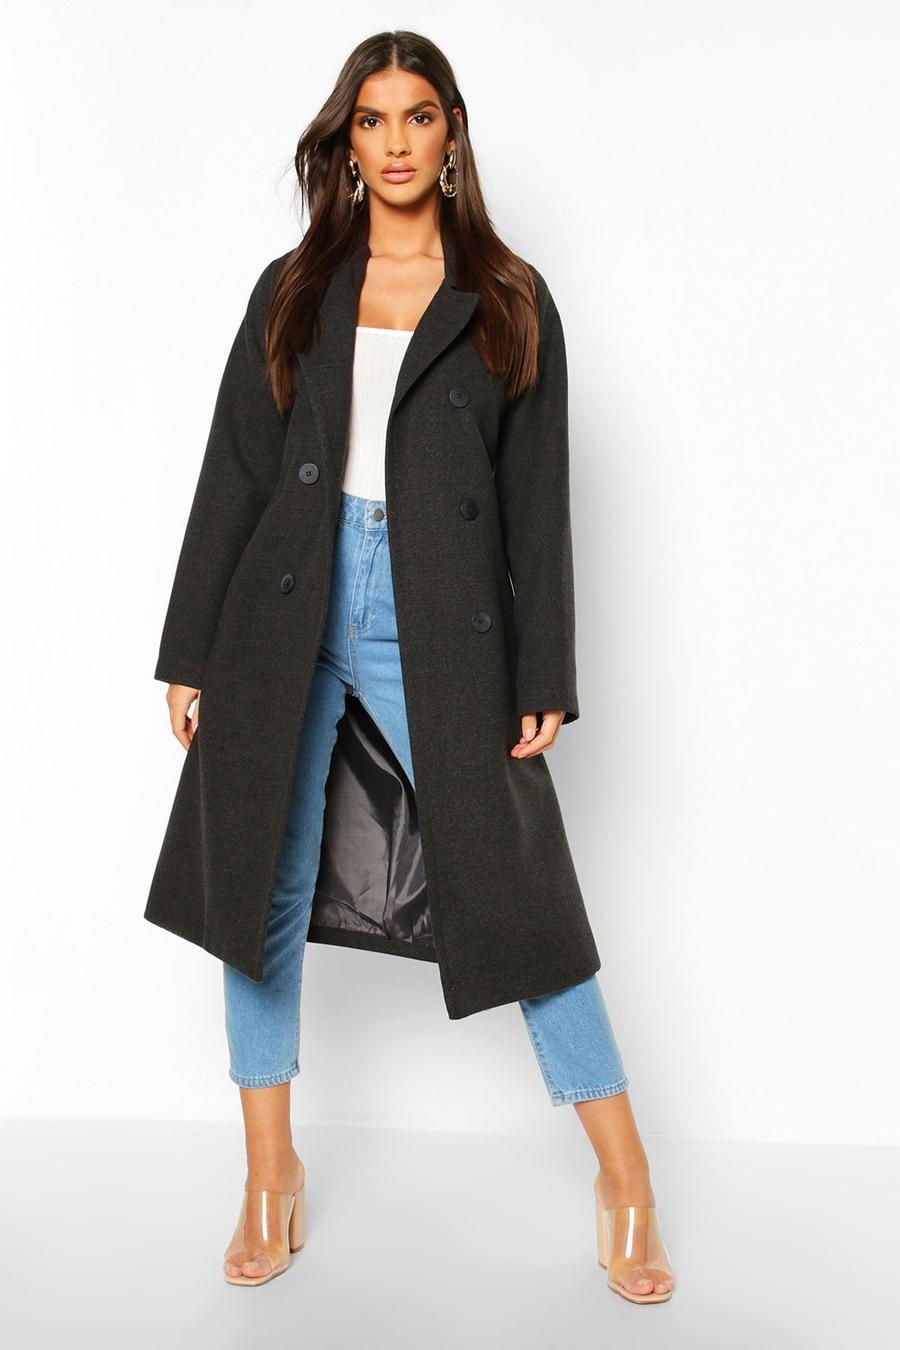 Charcoal grey Double Breasted Belted Wool Look Coat